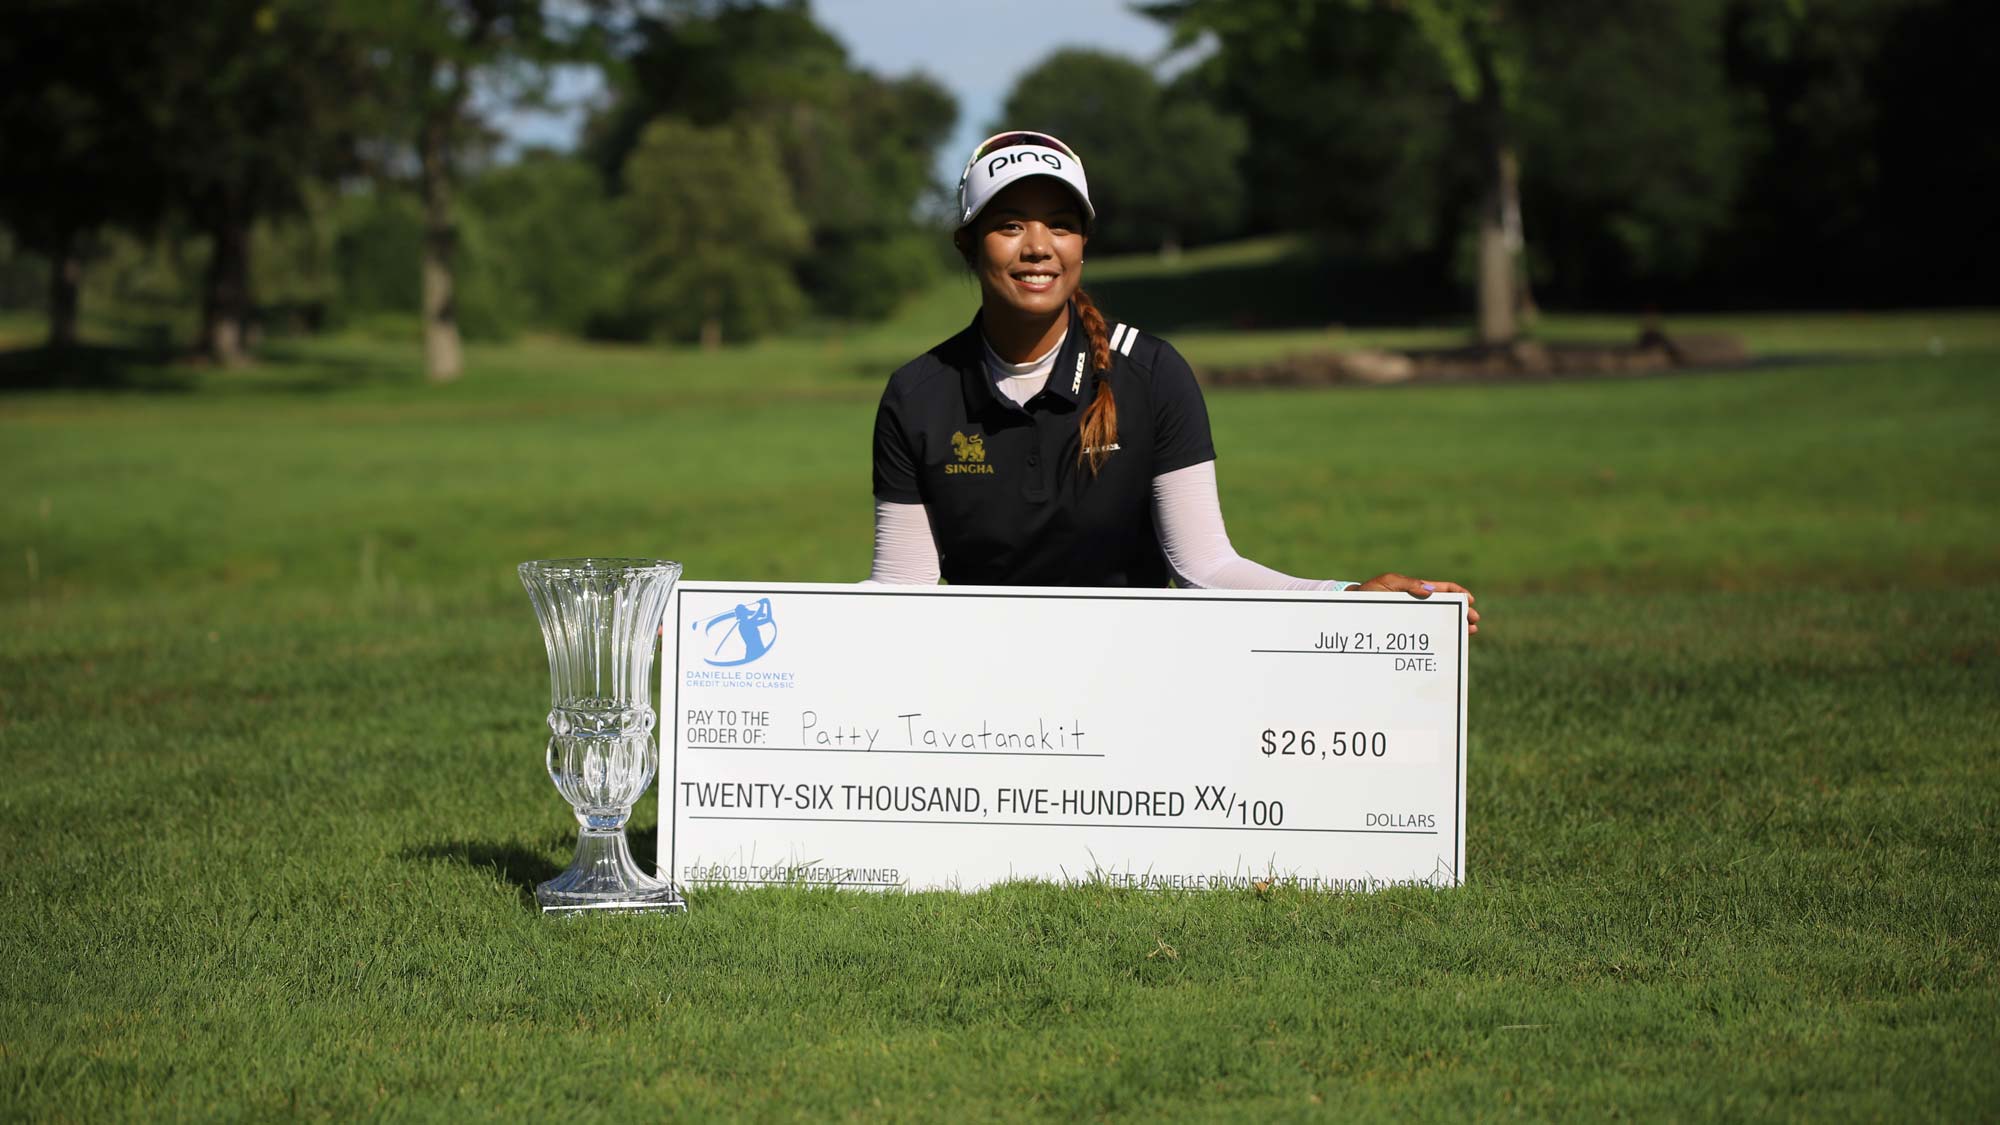 Patty Tavatanakit with check and trophy